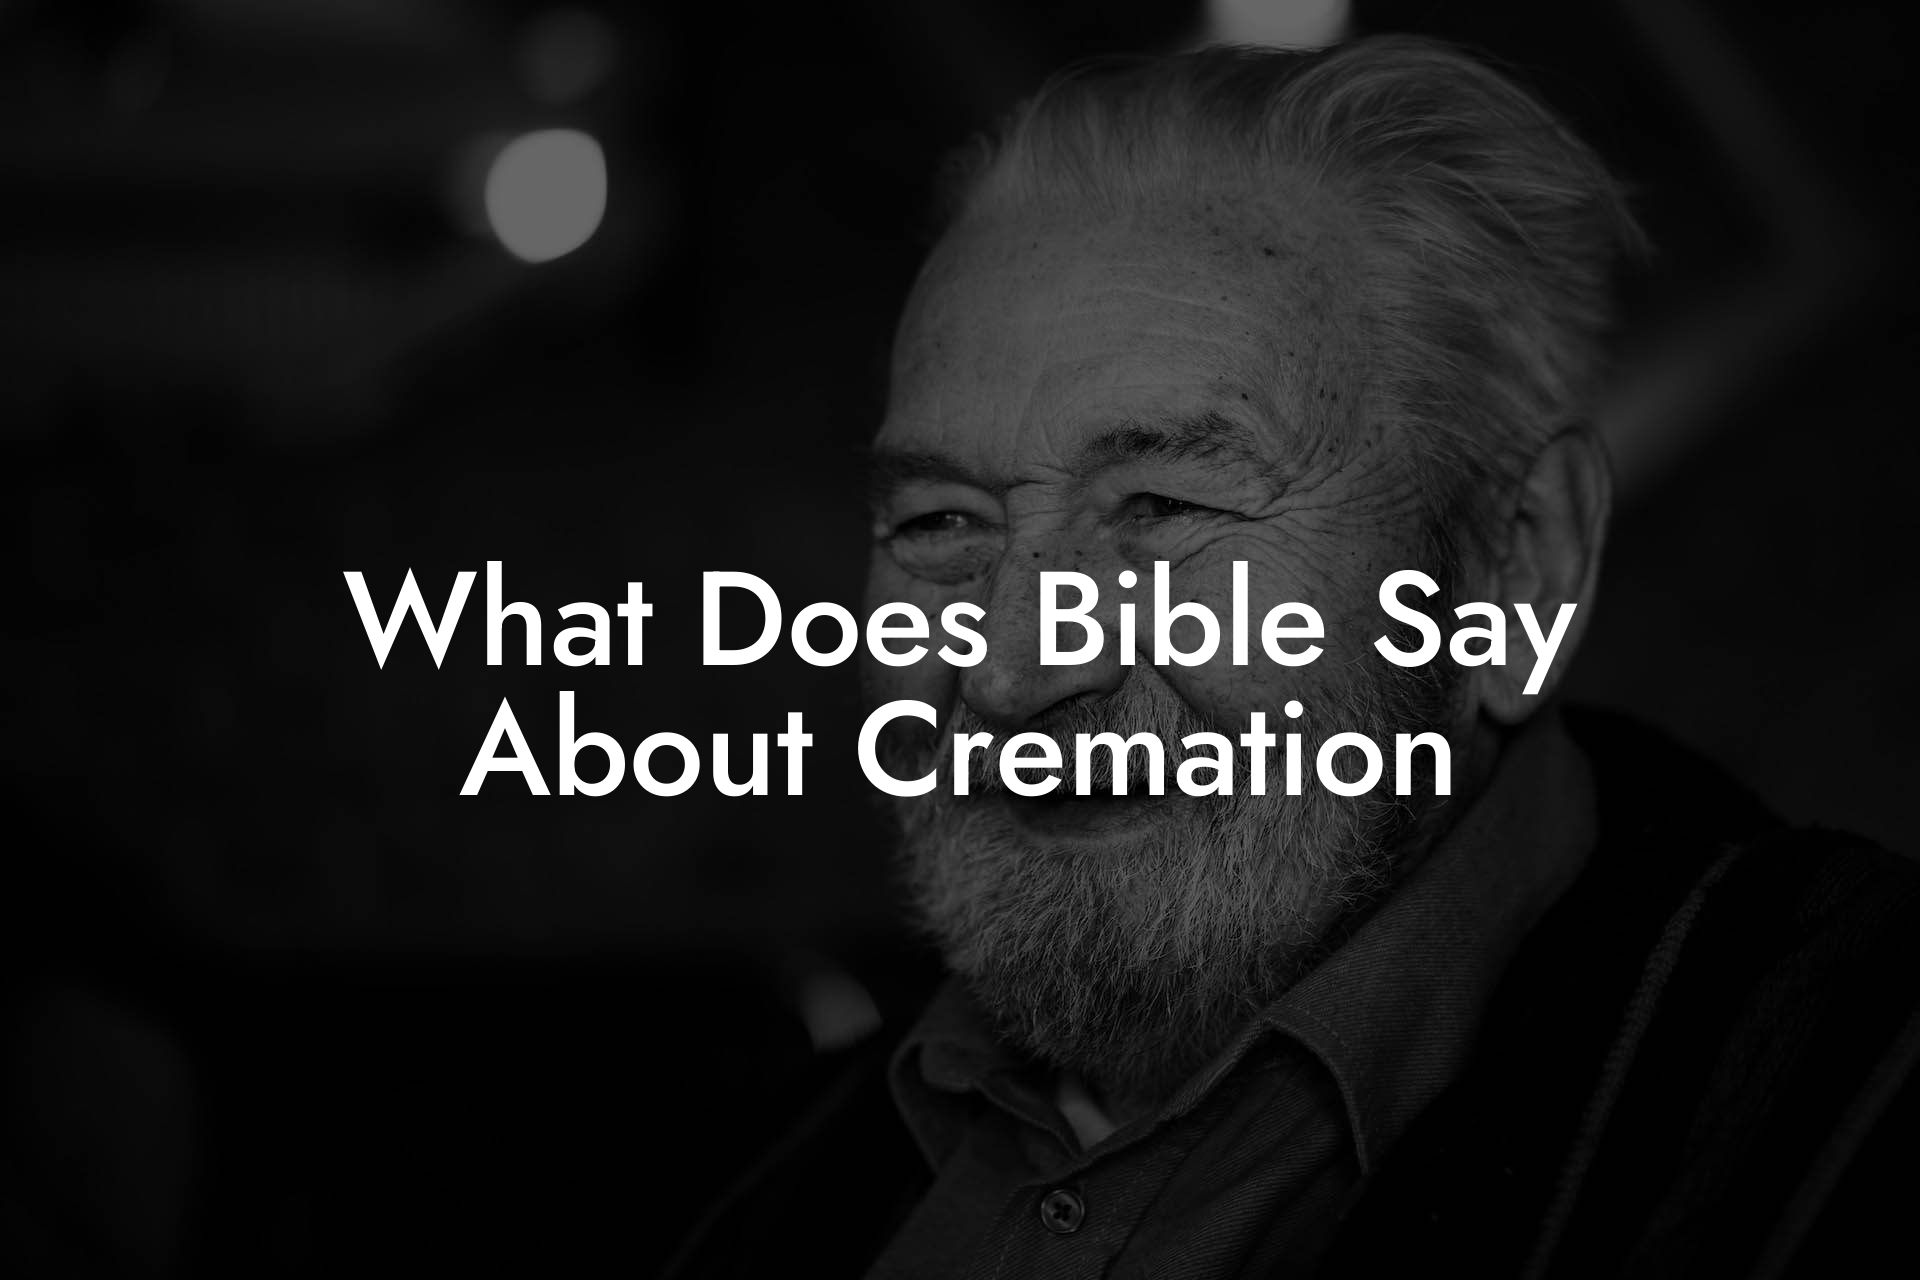 What Does Bible Say About Cremation